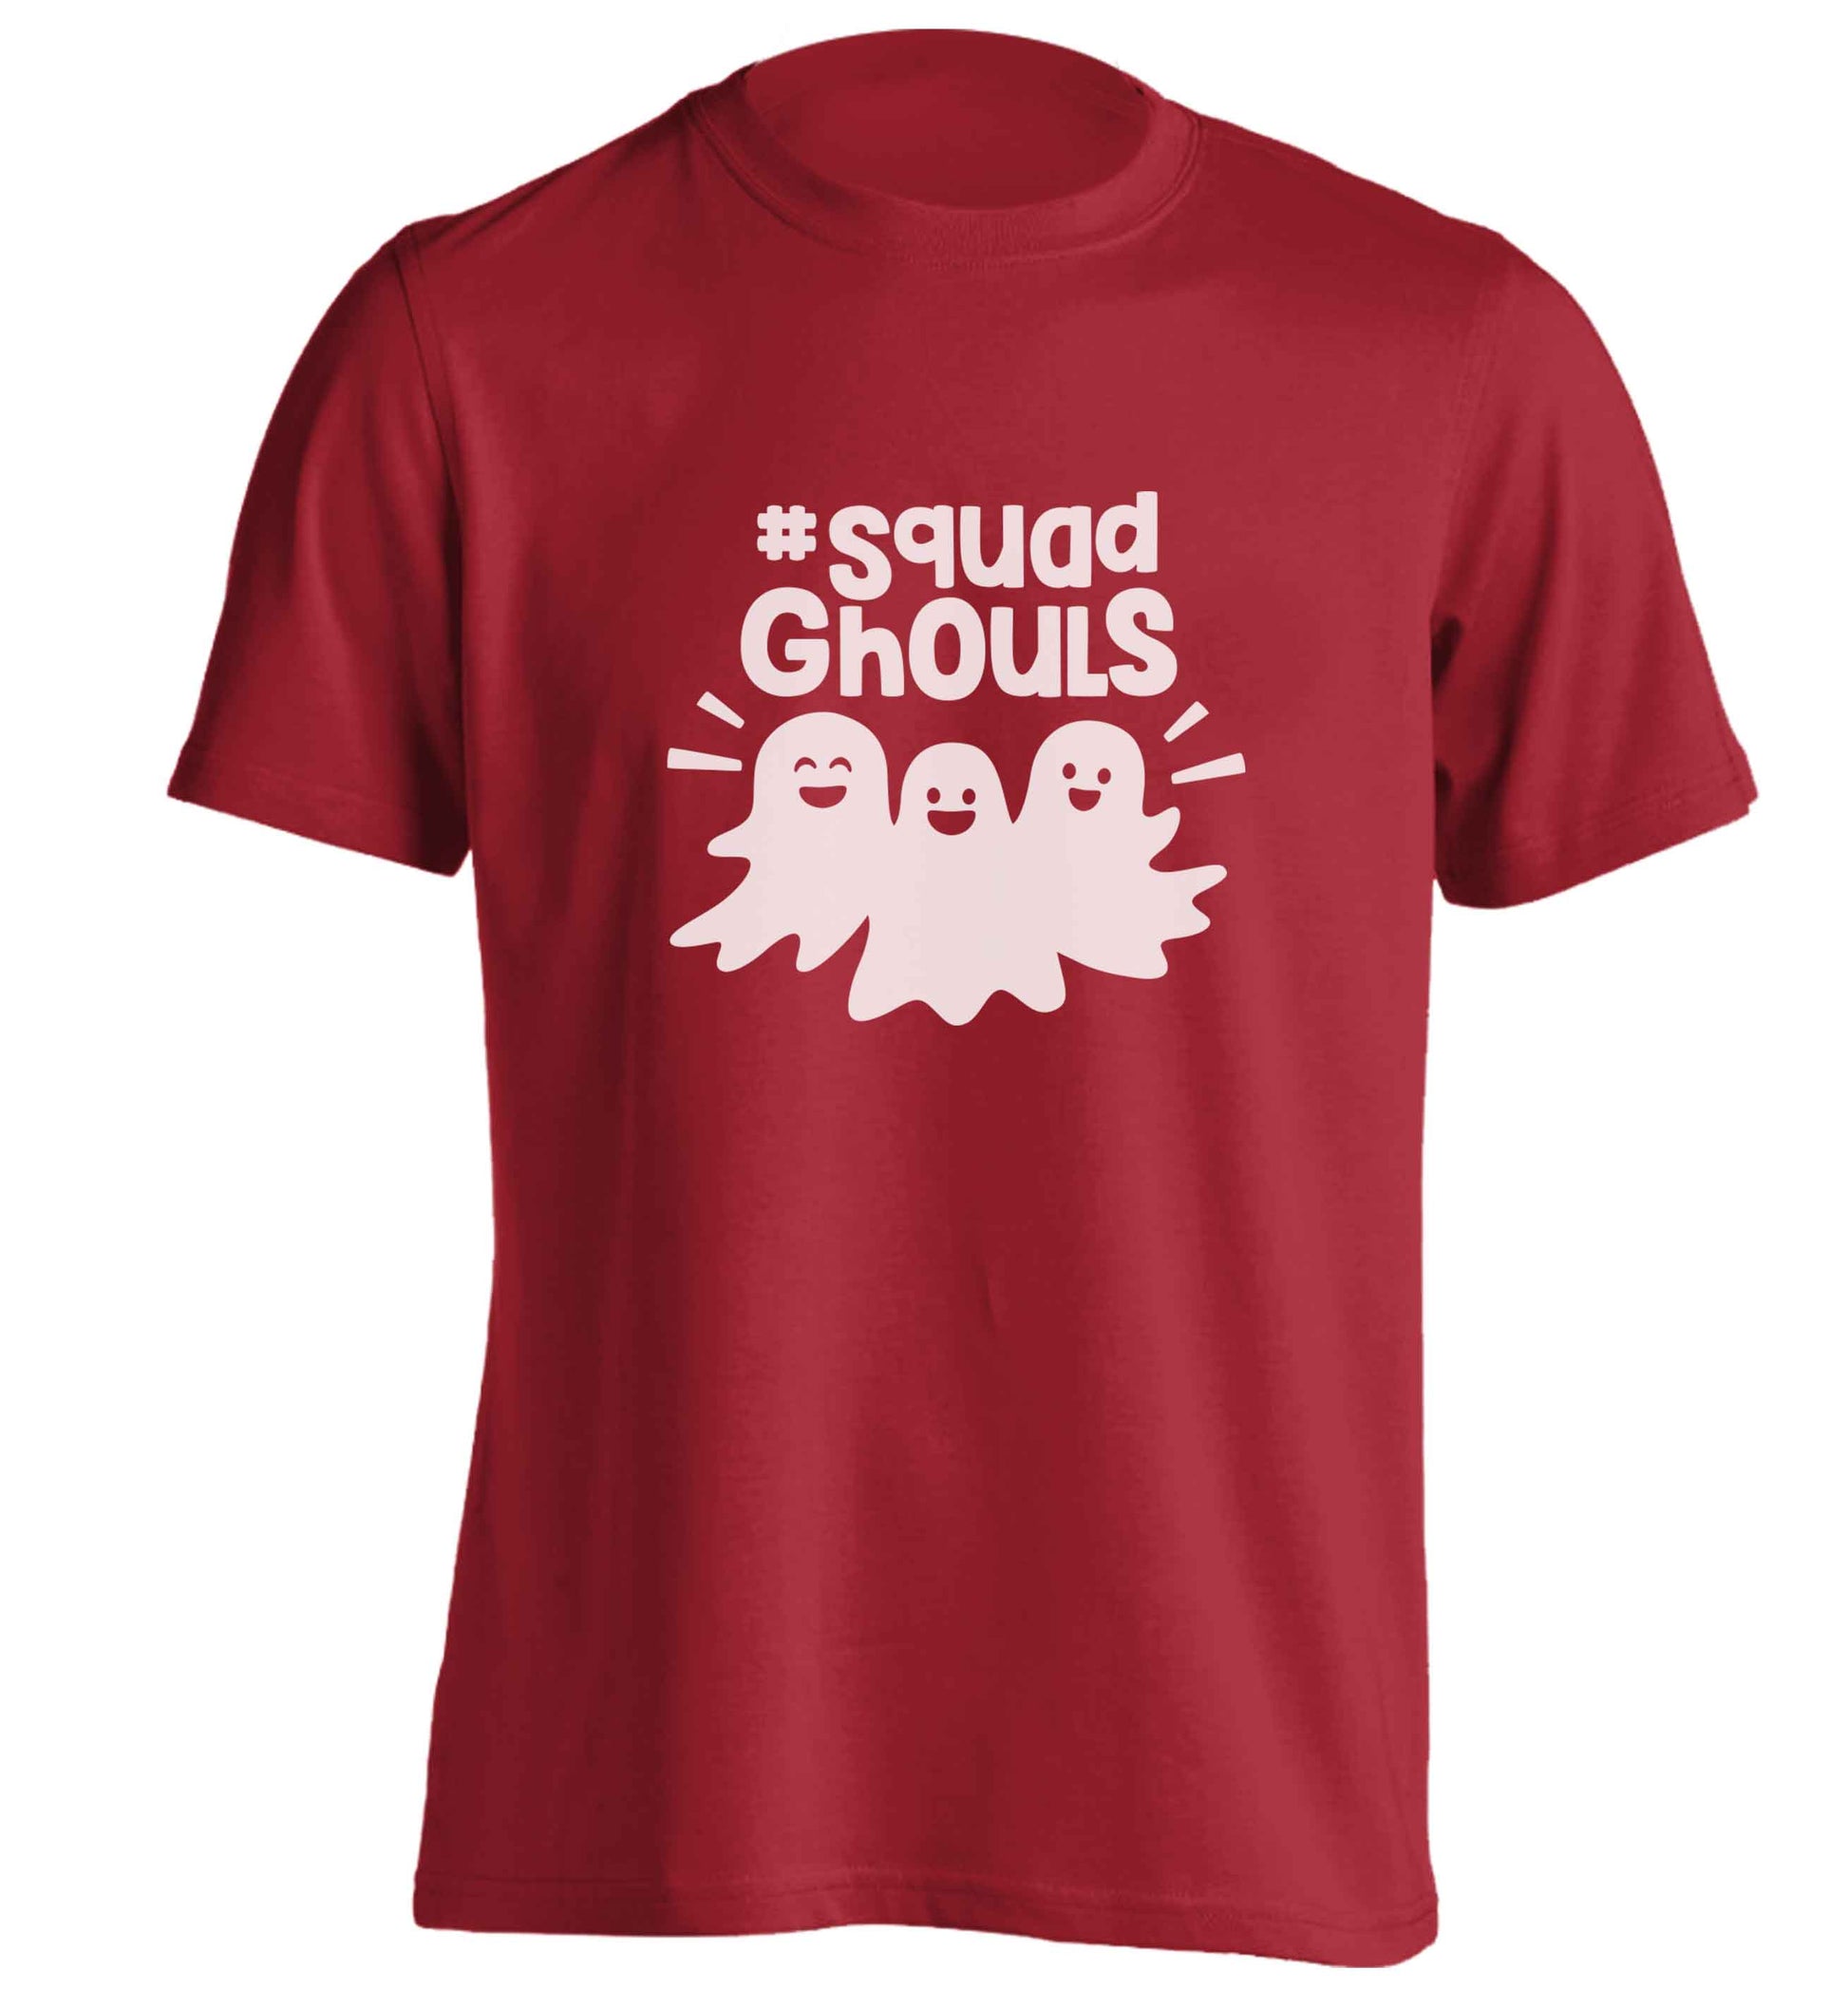 Squad ghouls Kit adults unisex red Tshirt 2XL